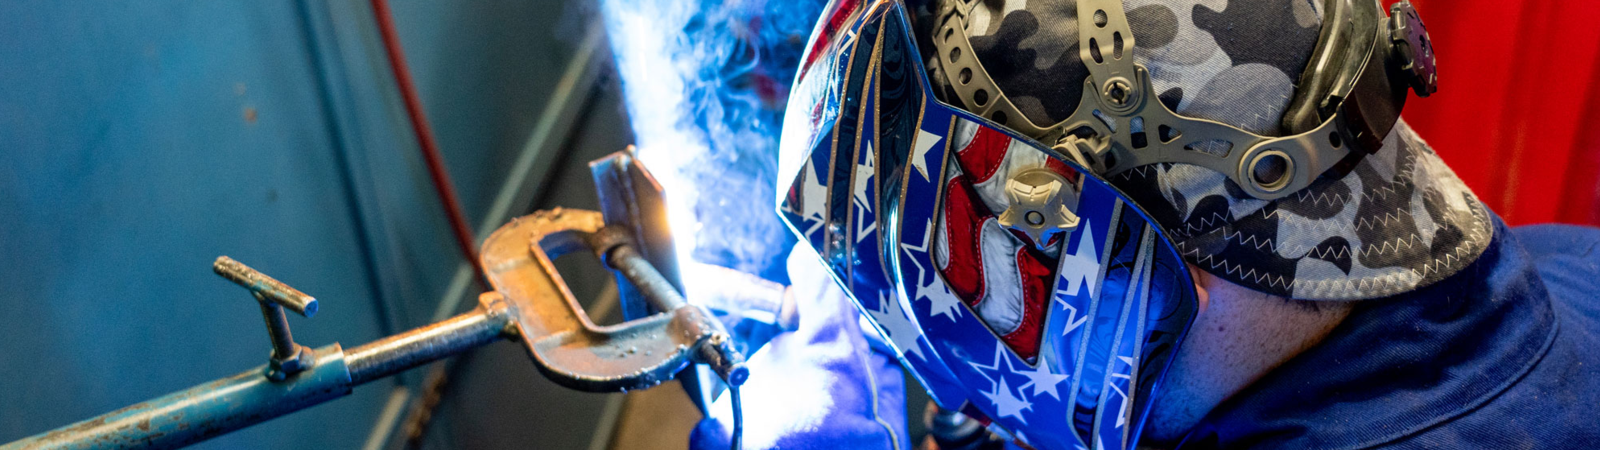 Welding Testing and Customized Training